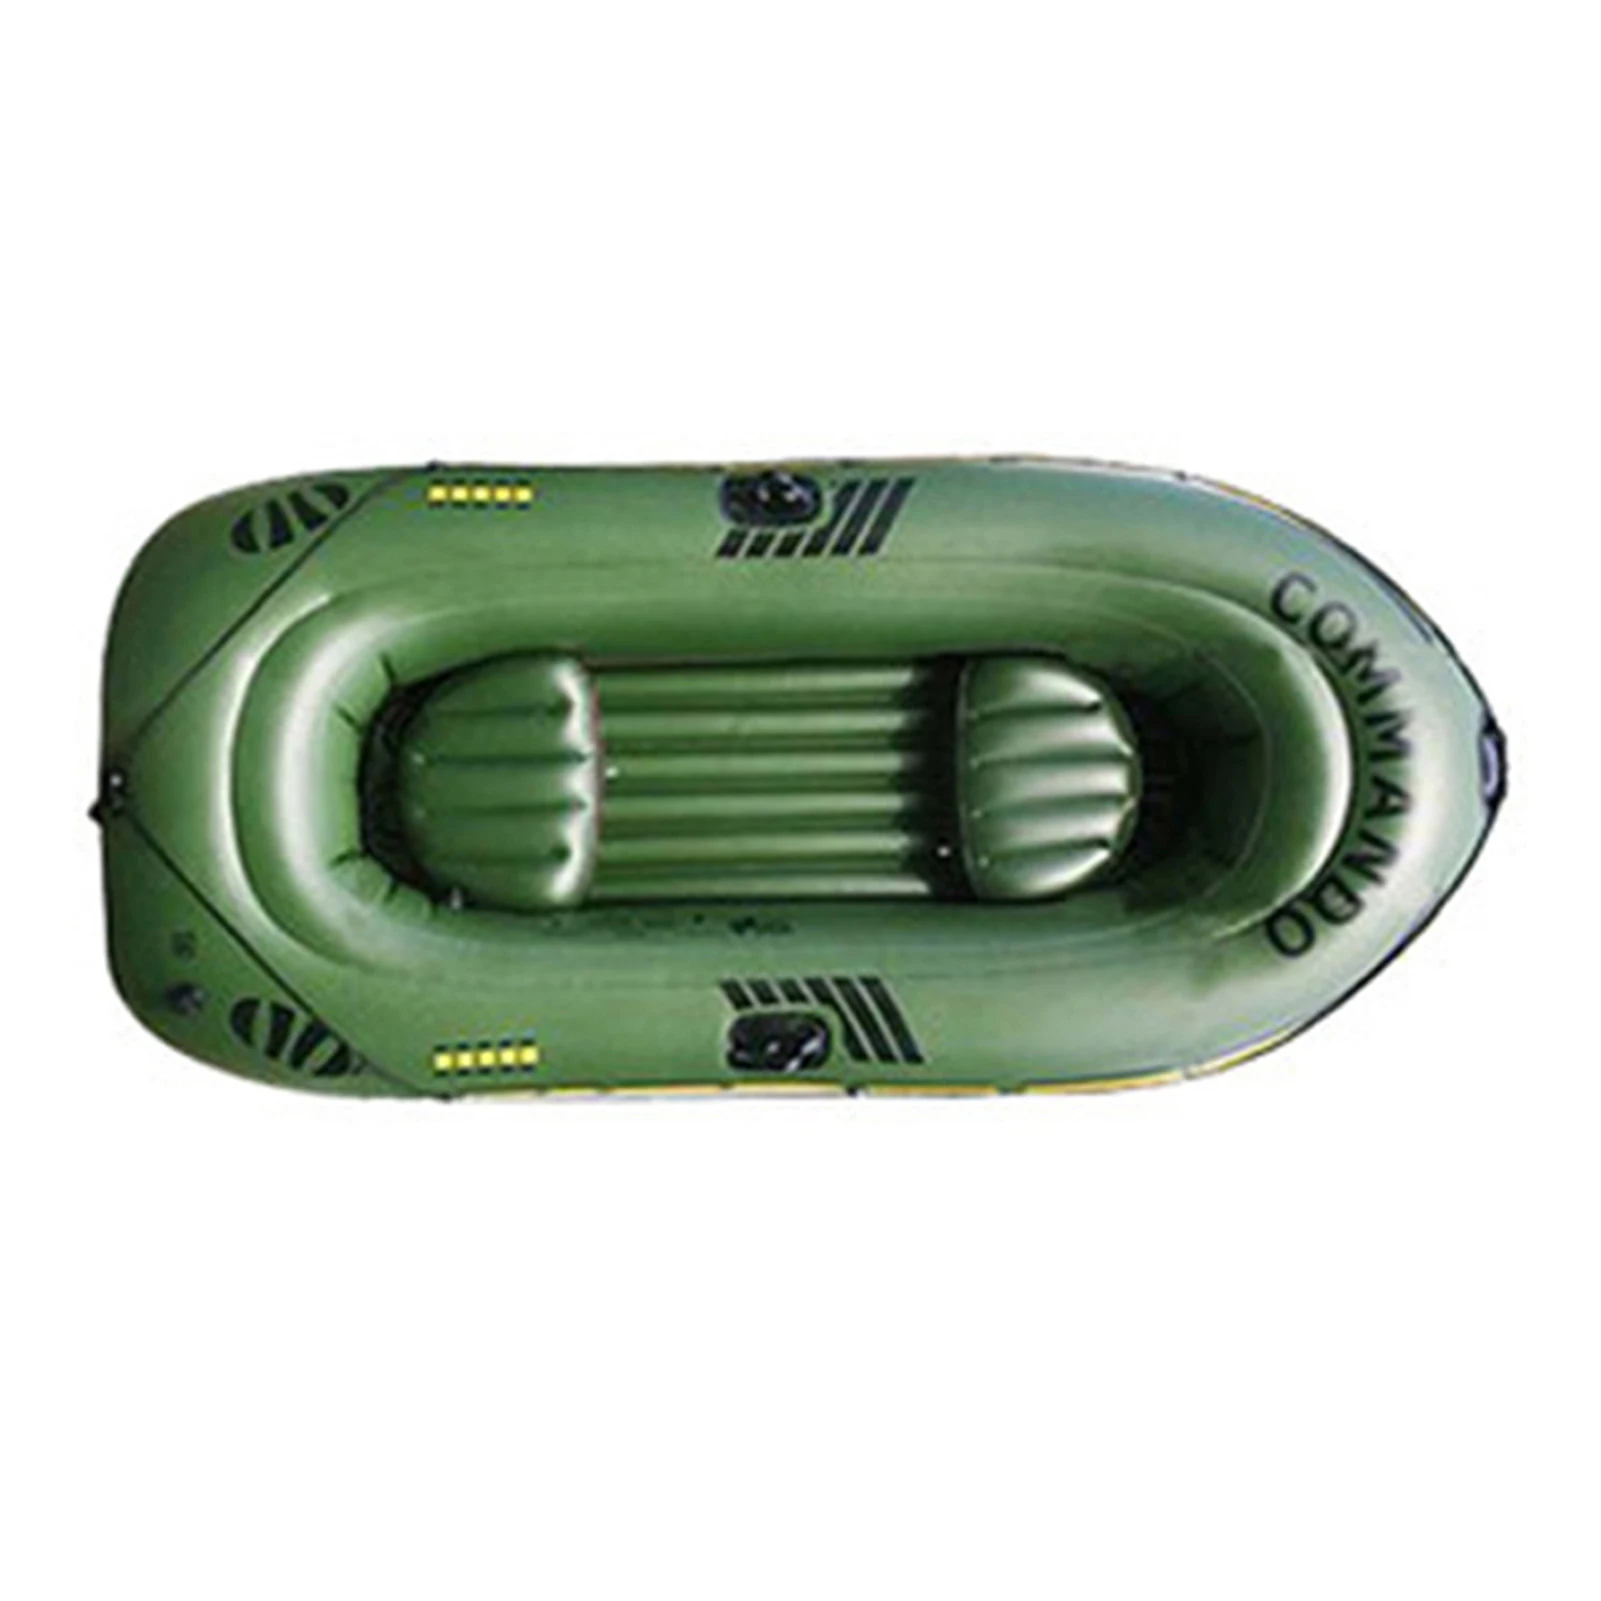 

PVC Inflatable Boat Thickened 2/3 People Portable Drifting Boat Kayak Fishing Boat Rafting Boat With Paddles Canoe Boat